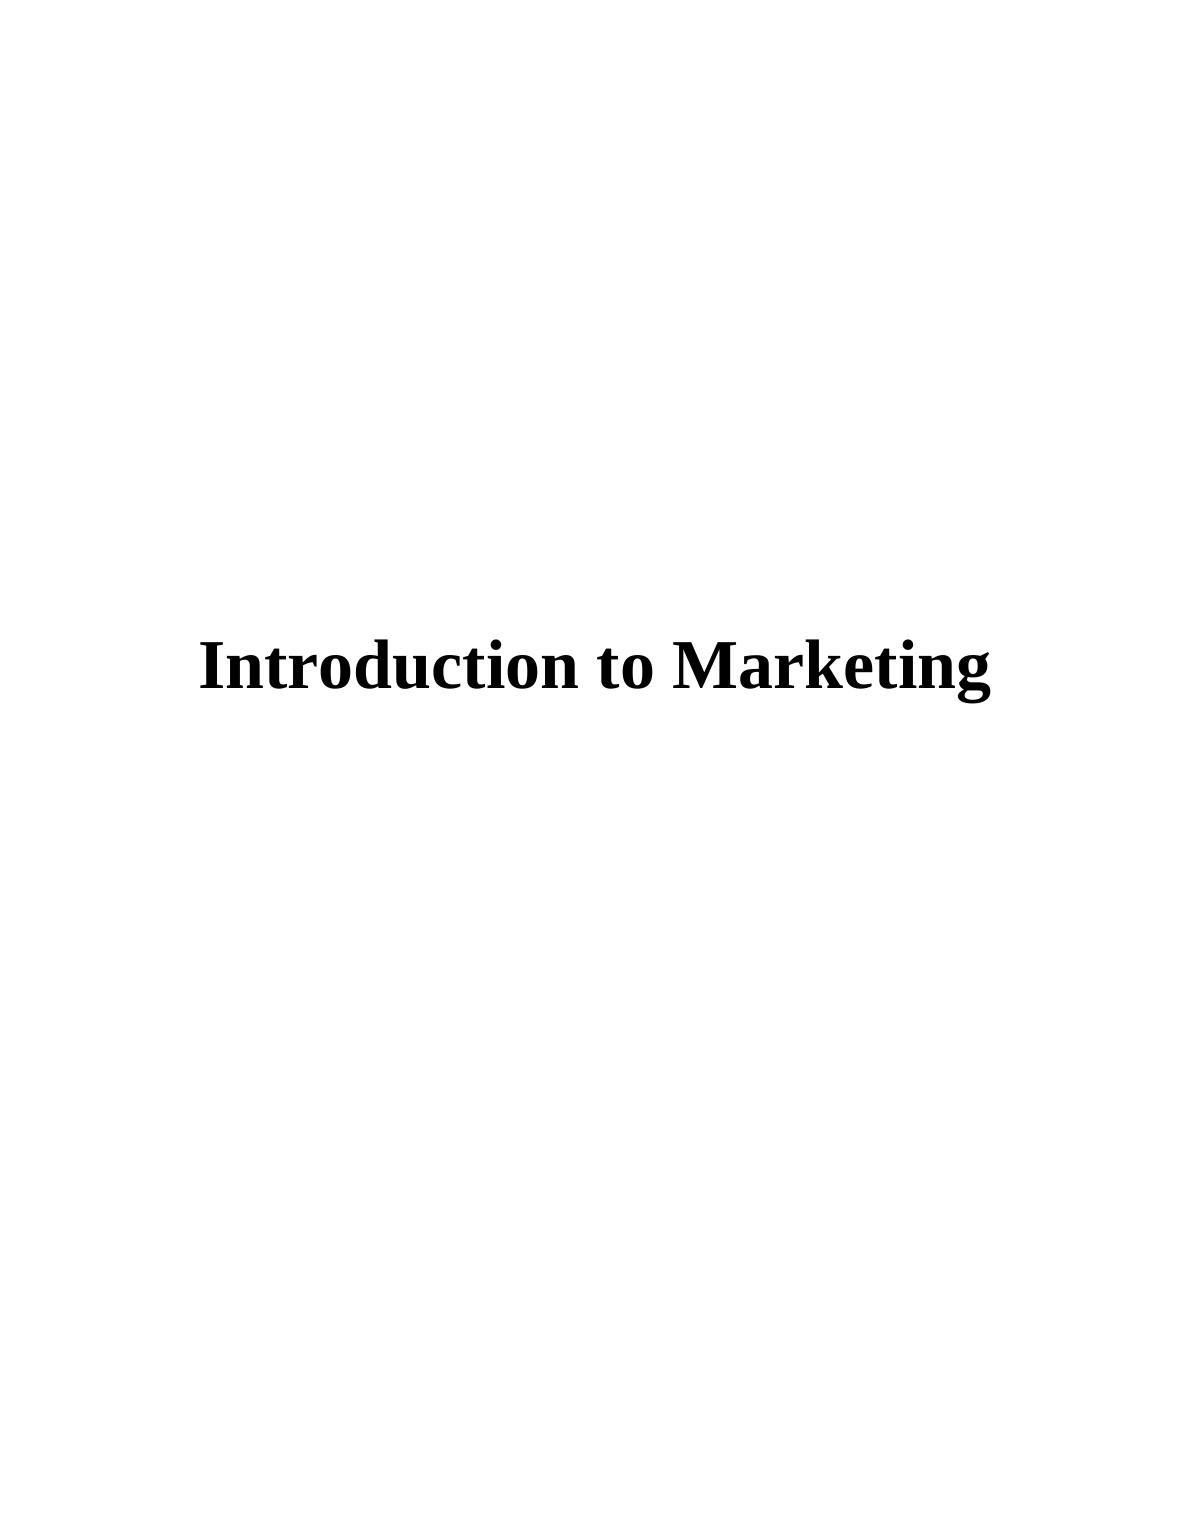 Introduction to Marketing Assignment - (Doc)_1